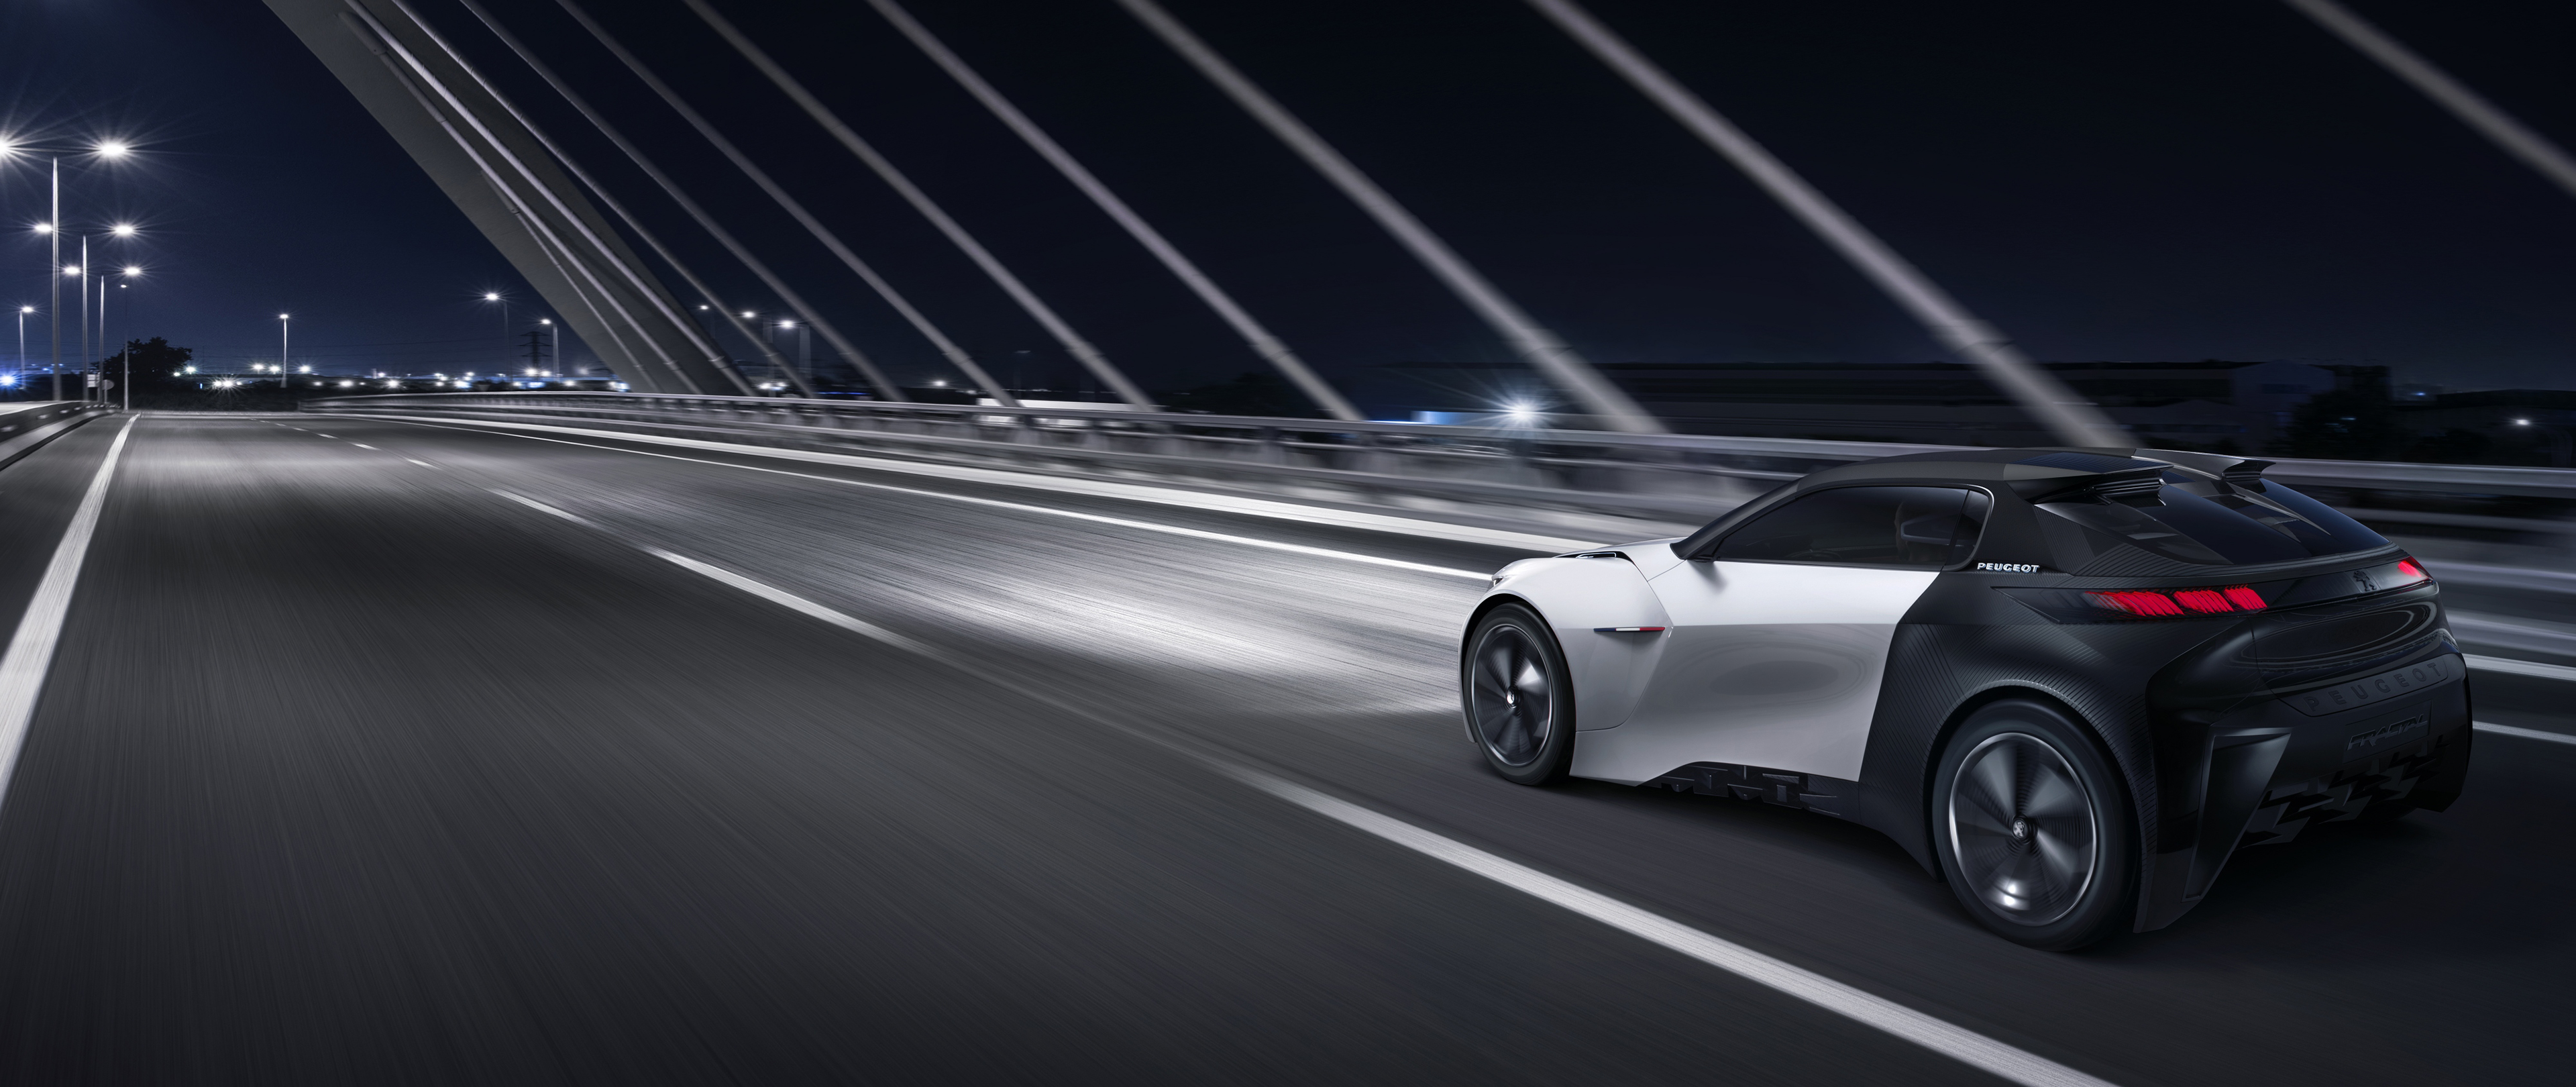 General 3840x1620 concept cars car vehicle electric car bridge road motion blur night lights Peugeot French Cars